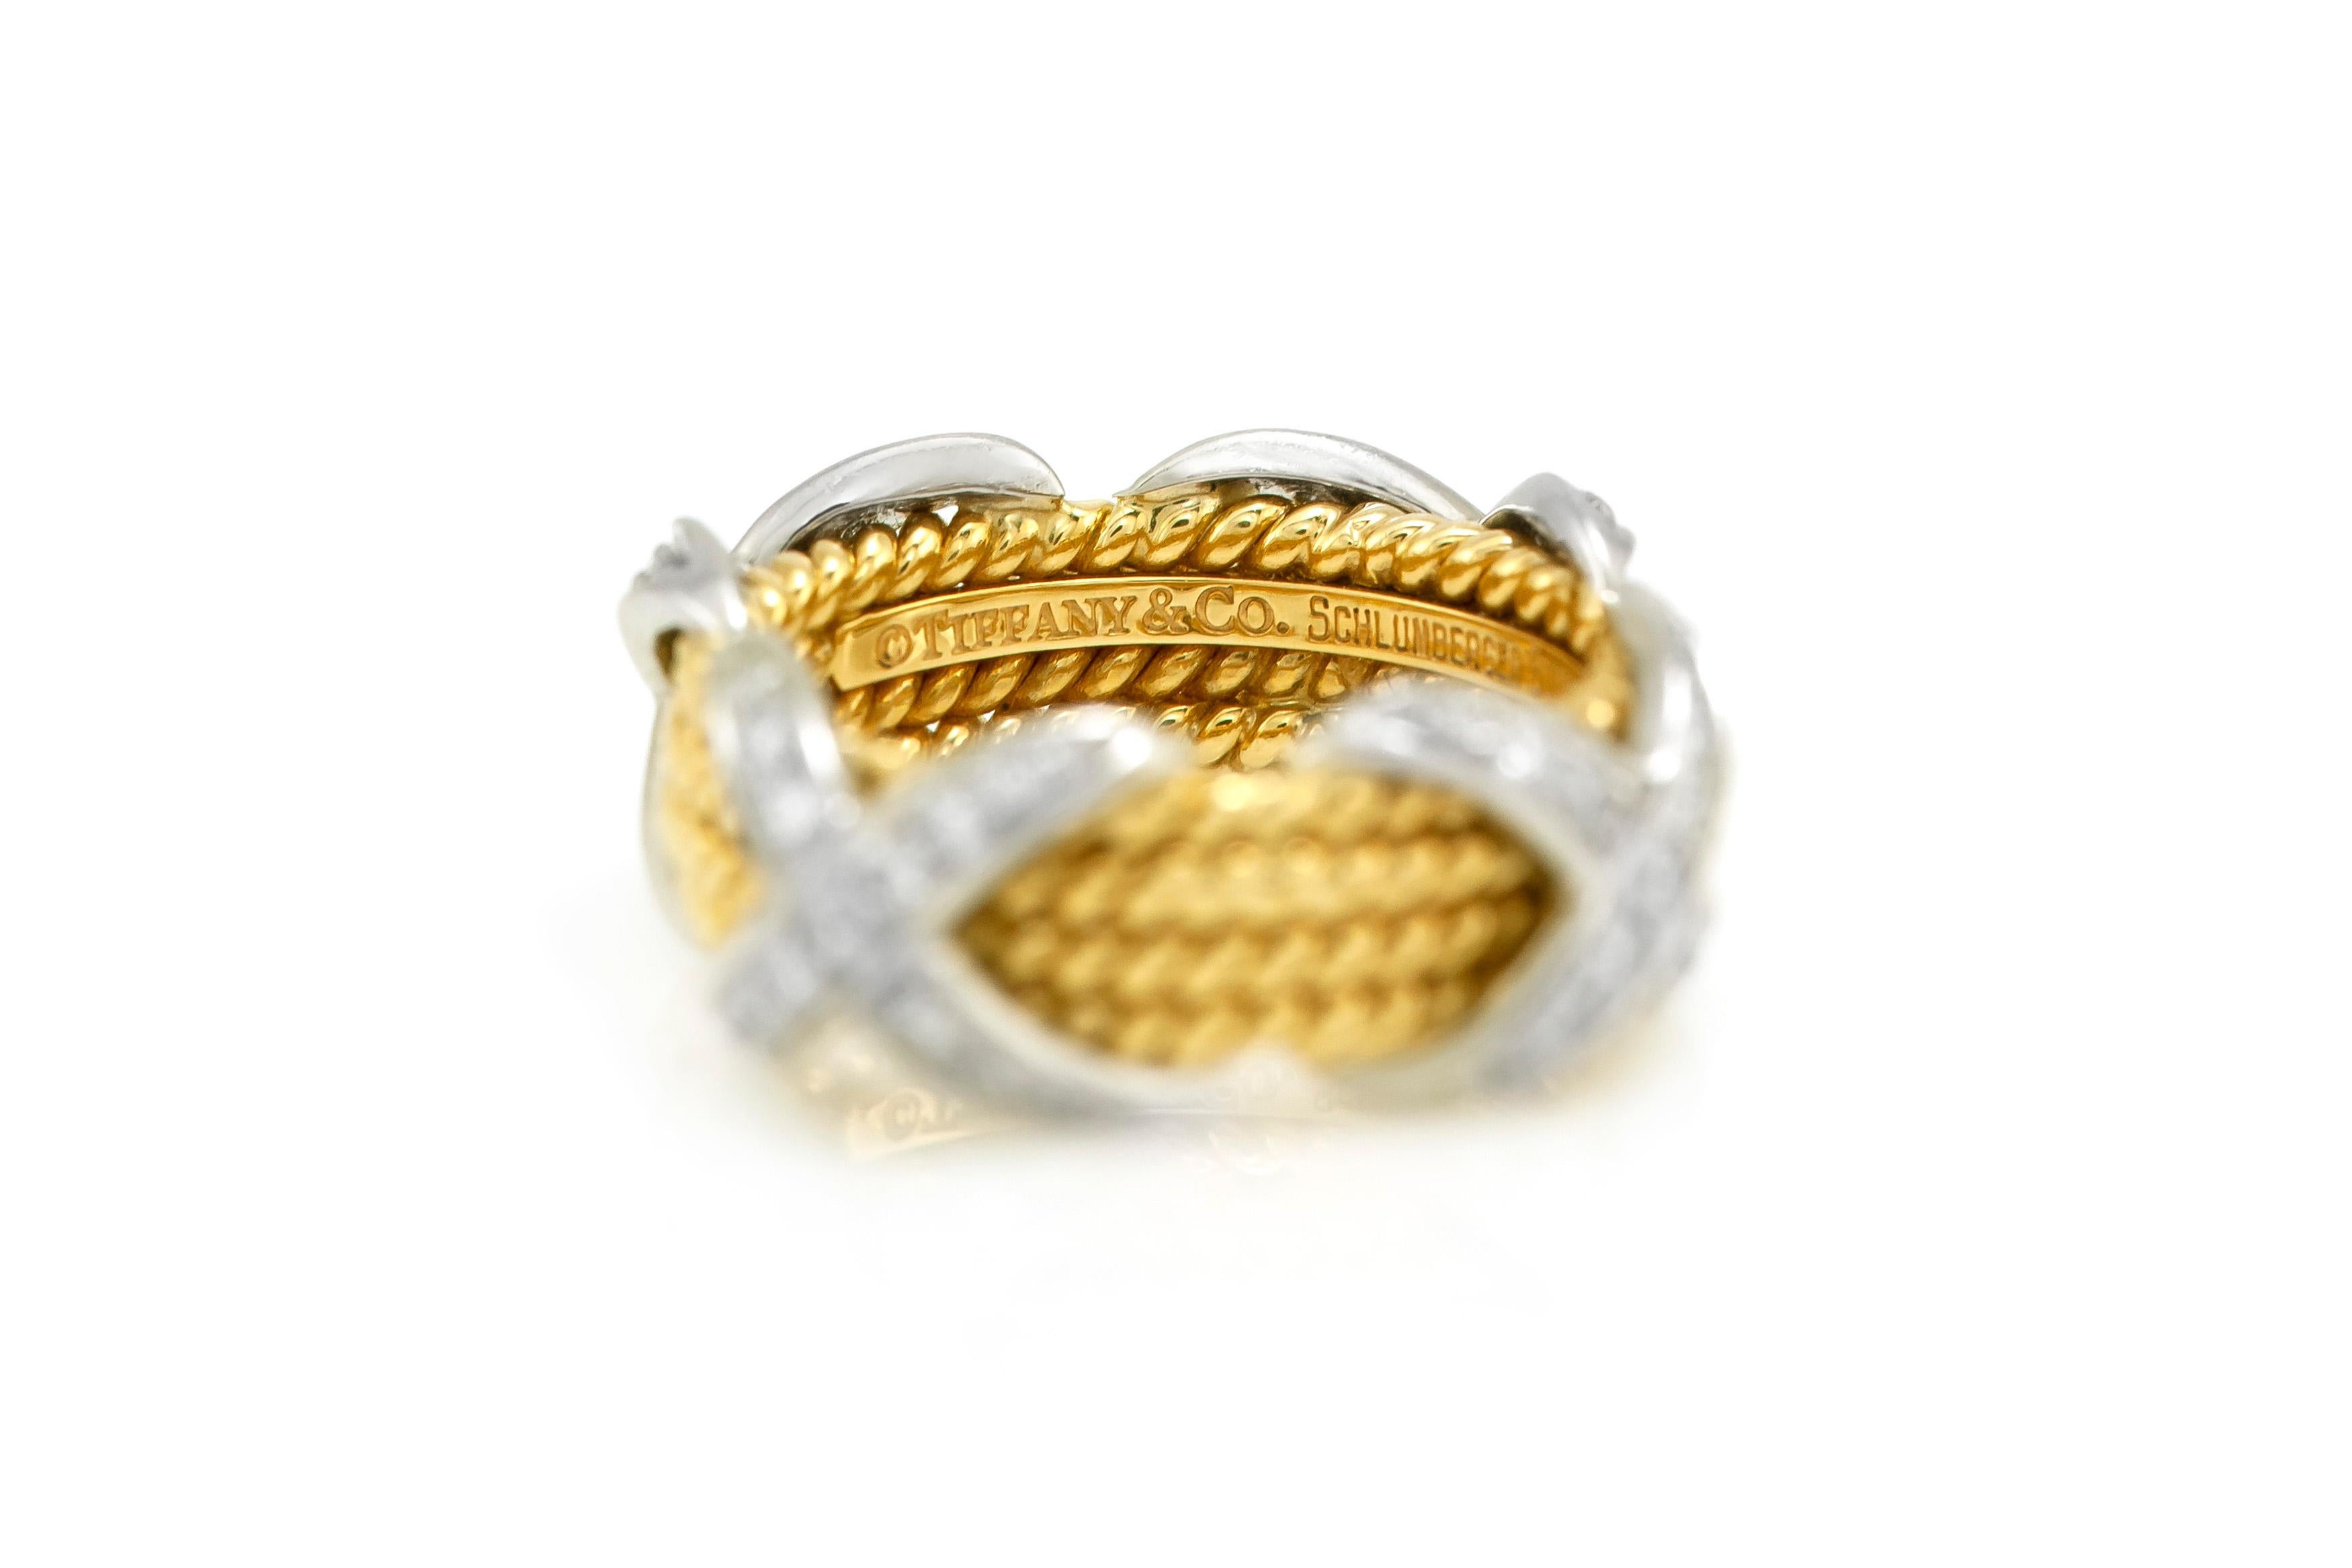 The ring is finely crafted in 18k yellow gold with diamonds weighing approximately total of 1.25 carat.

Sign Tiffany & Co